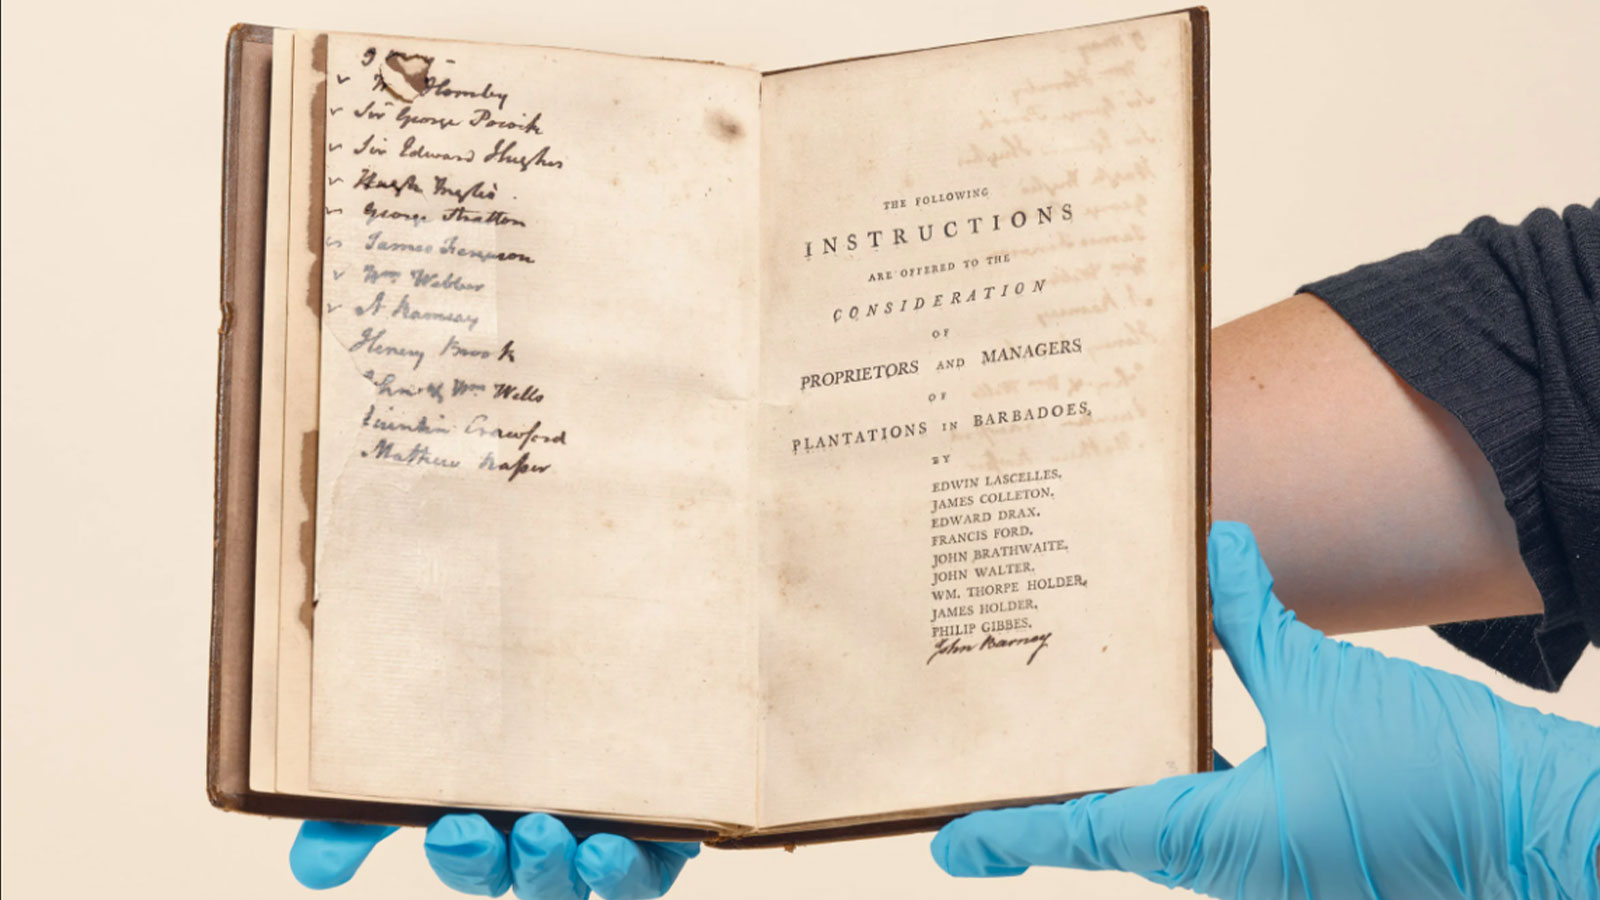 The 18th century book known as “The Instructions,” co-authored by Edward Drax, Edwin Lascelles, and others, at the Barbados Museum & Historical Society. 